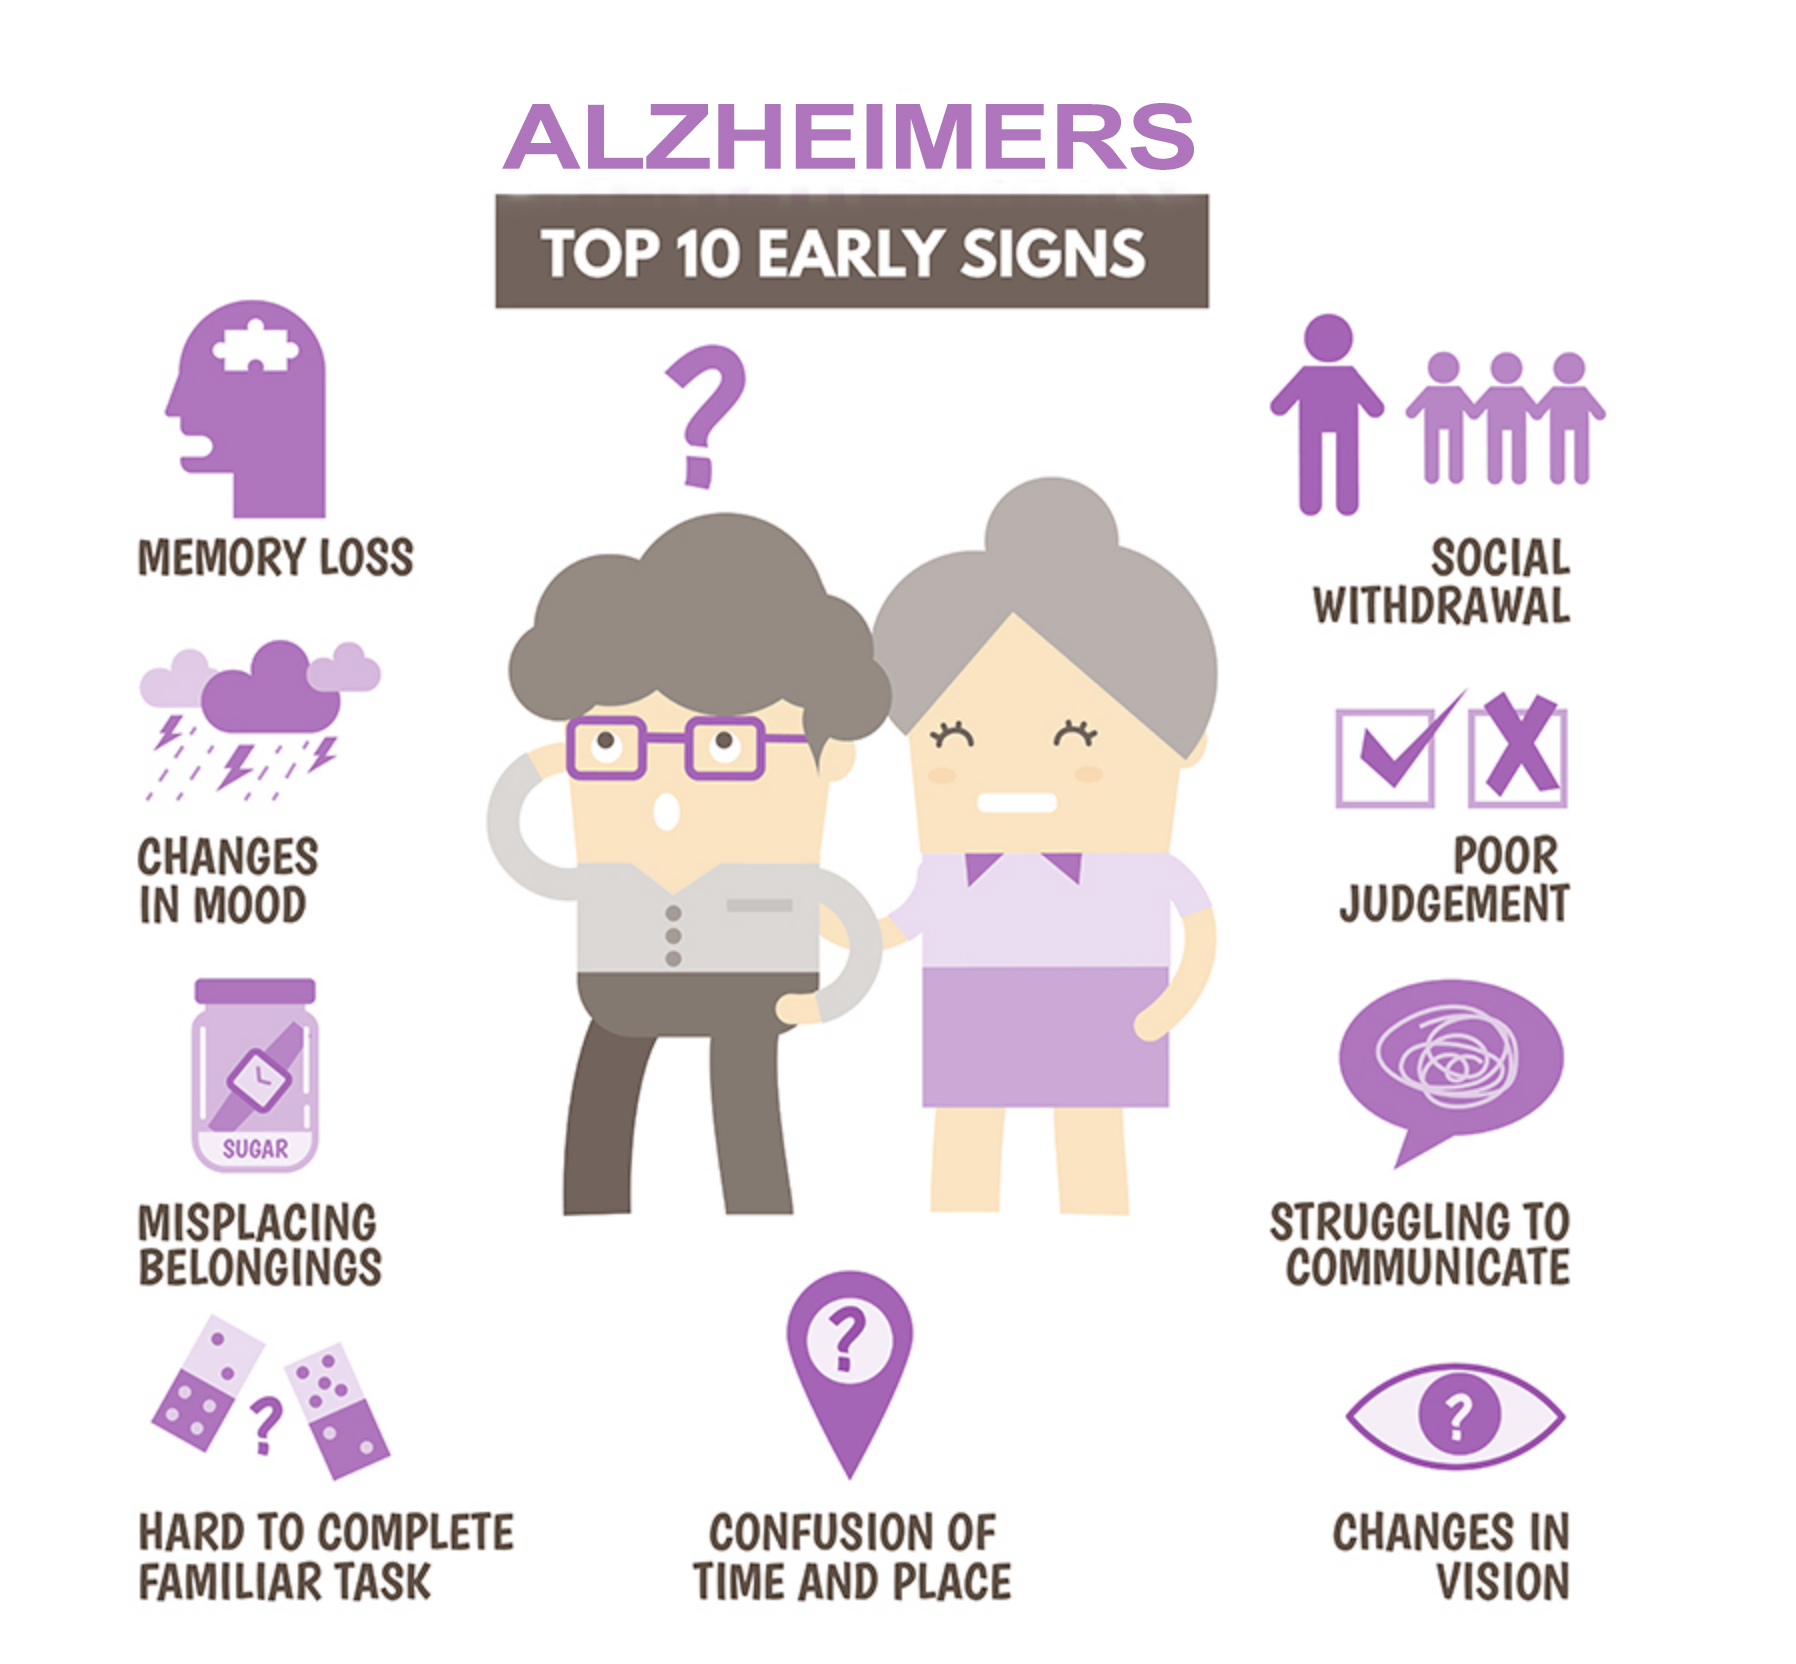 Stages Of Alzheimer Disease